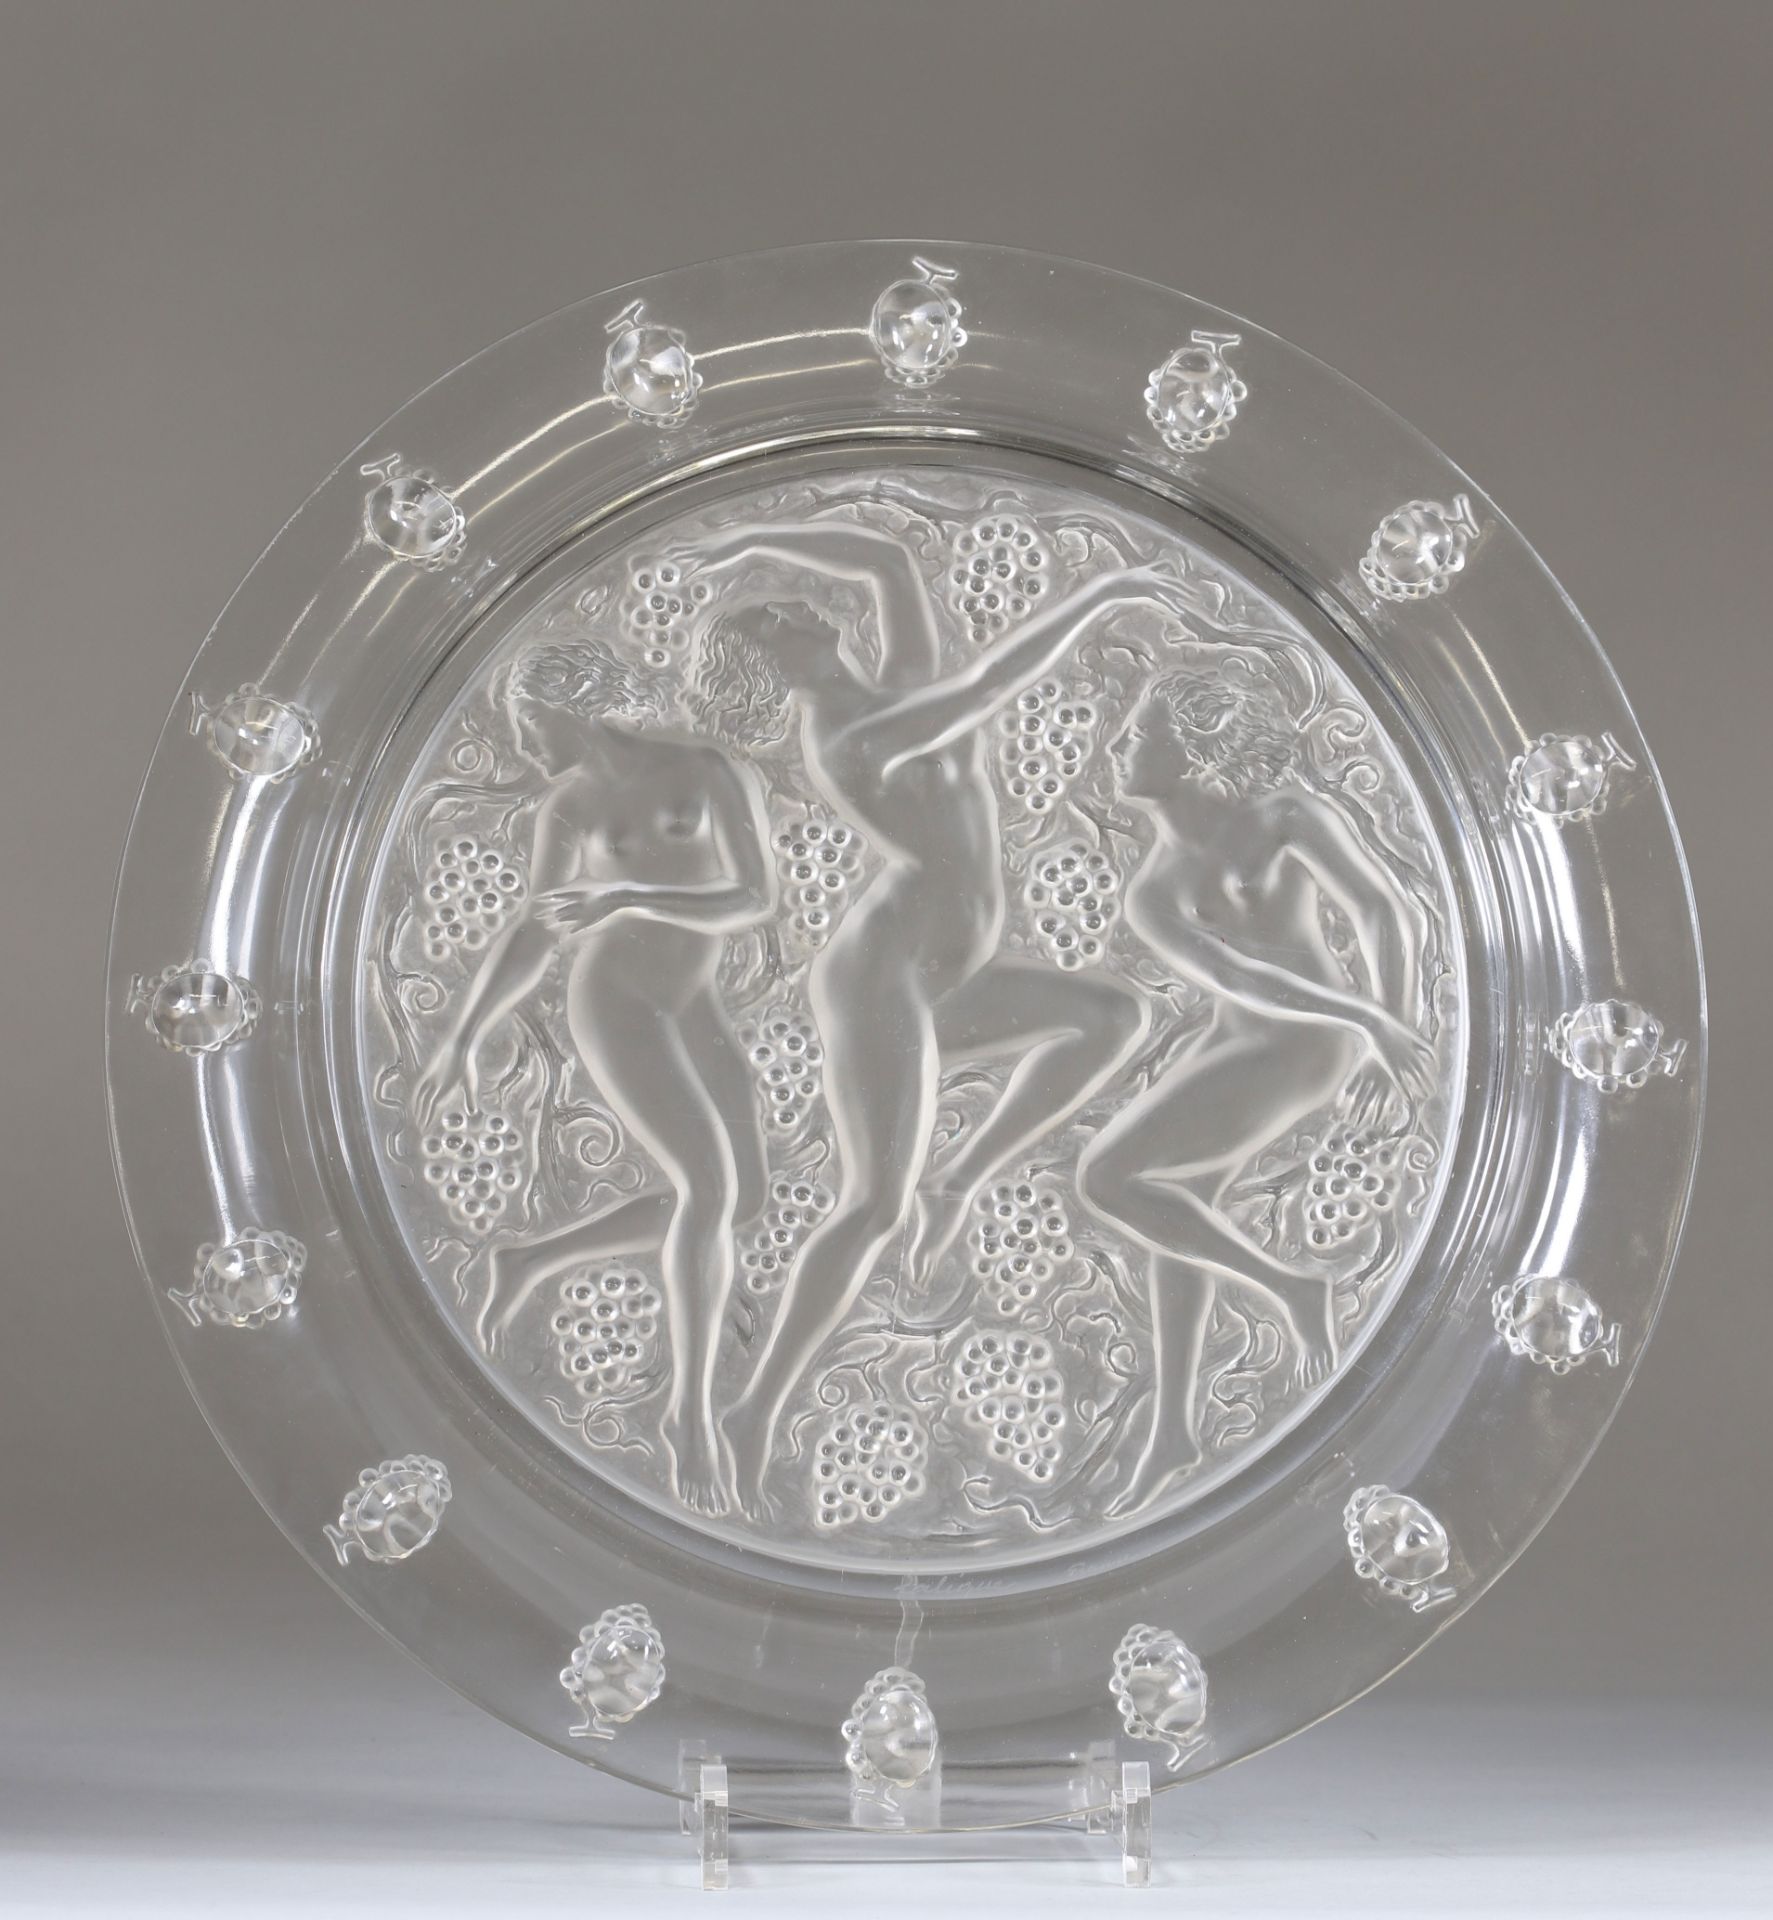 Lalique large dish decorated with the 3 graces in the vines - Image 2 of 2